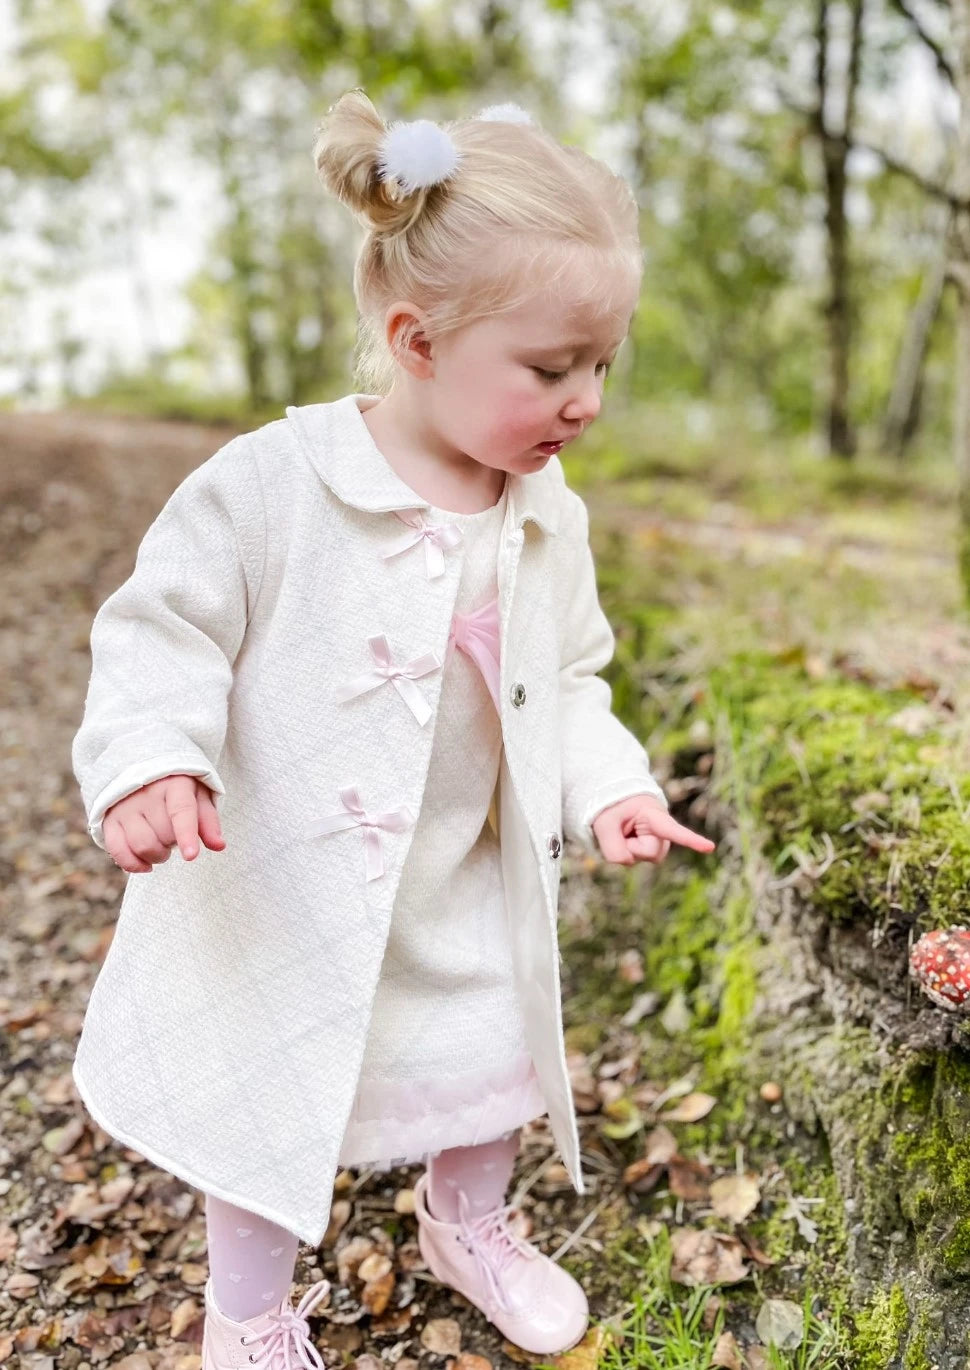 caramelo kids Pink Tweed Tulle Bow Dress & Coat from tors childrens wear